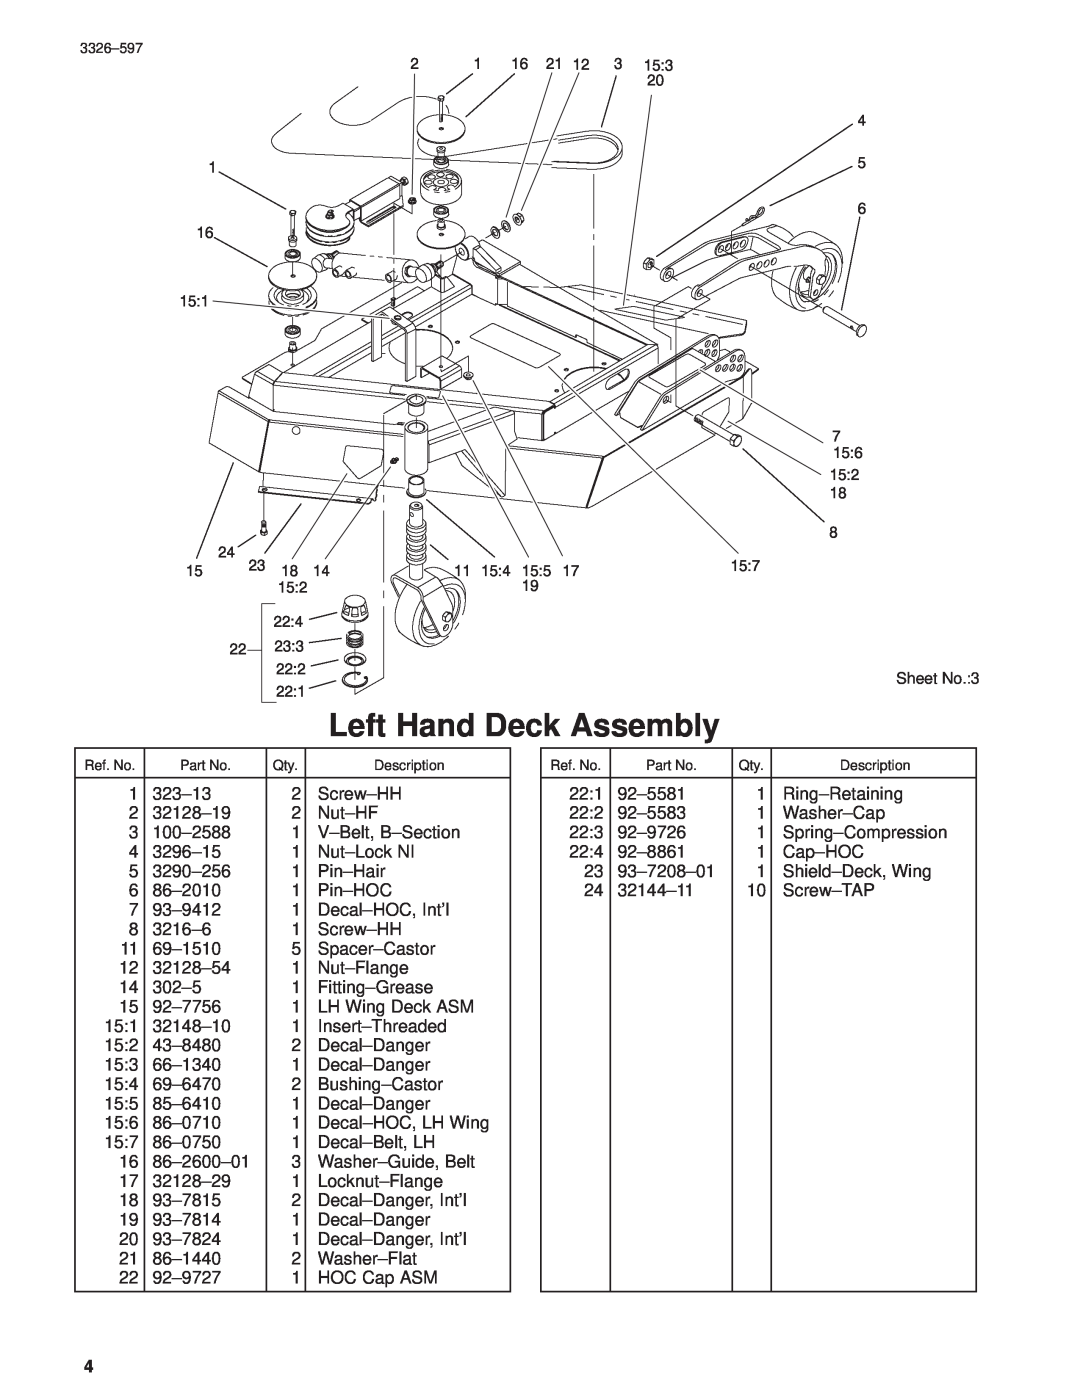 Toro 30402210000001 and Up manual Left Hand Deck Assembly, Sheet No.3 